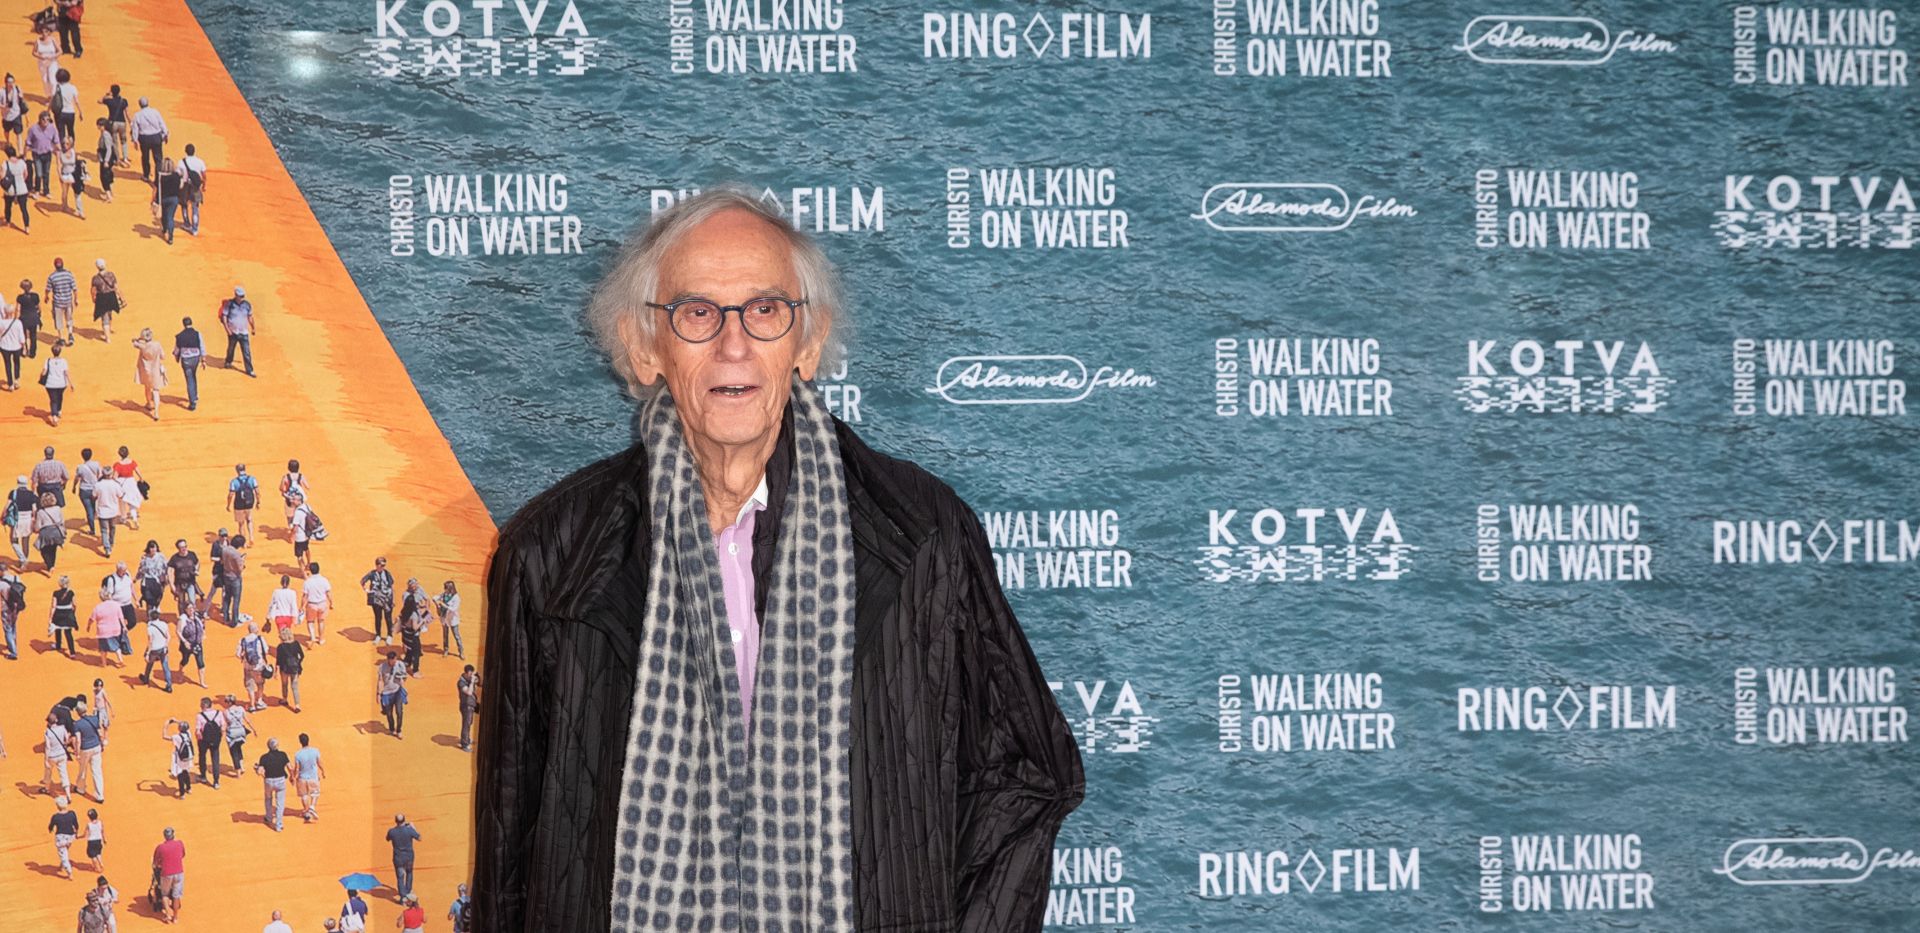 epa08456635 (FILE) - Bulgarian artist Christo poses on the red carpet for the movie premiere 'Christo Walking on Water' in Berlin, Germany, 26 March 2019 (reissued 31 May 2020). According to media reports, Christo has died aged 84.  EPA/HAYOUNG JEON *** Local Caption *** 55083659